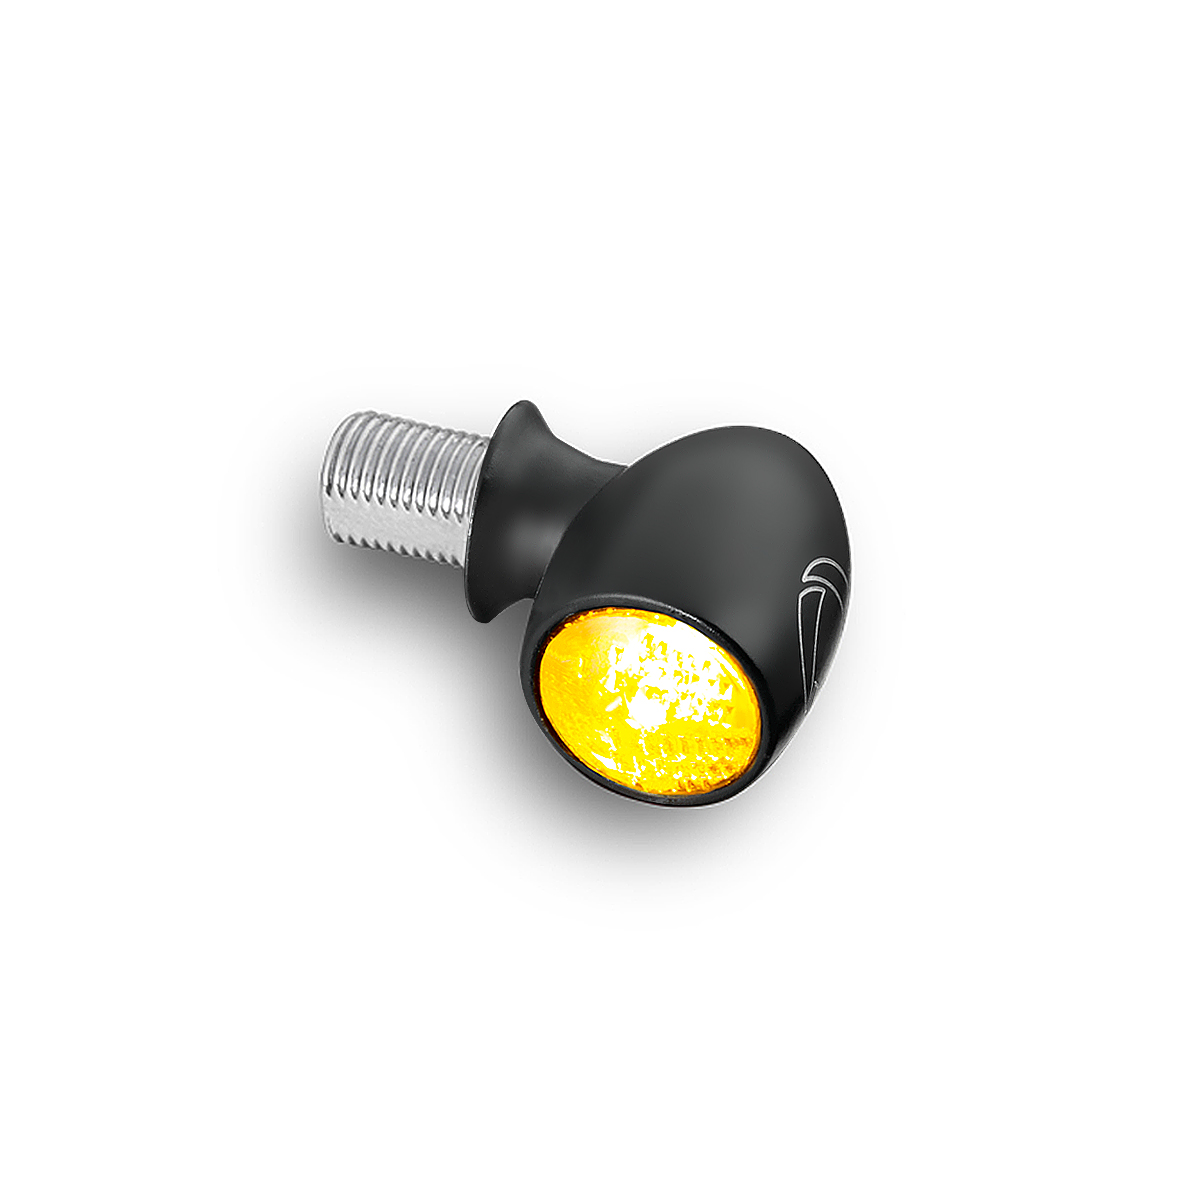 Atto®  LED mini turn signals for motorcycles